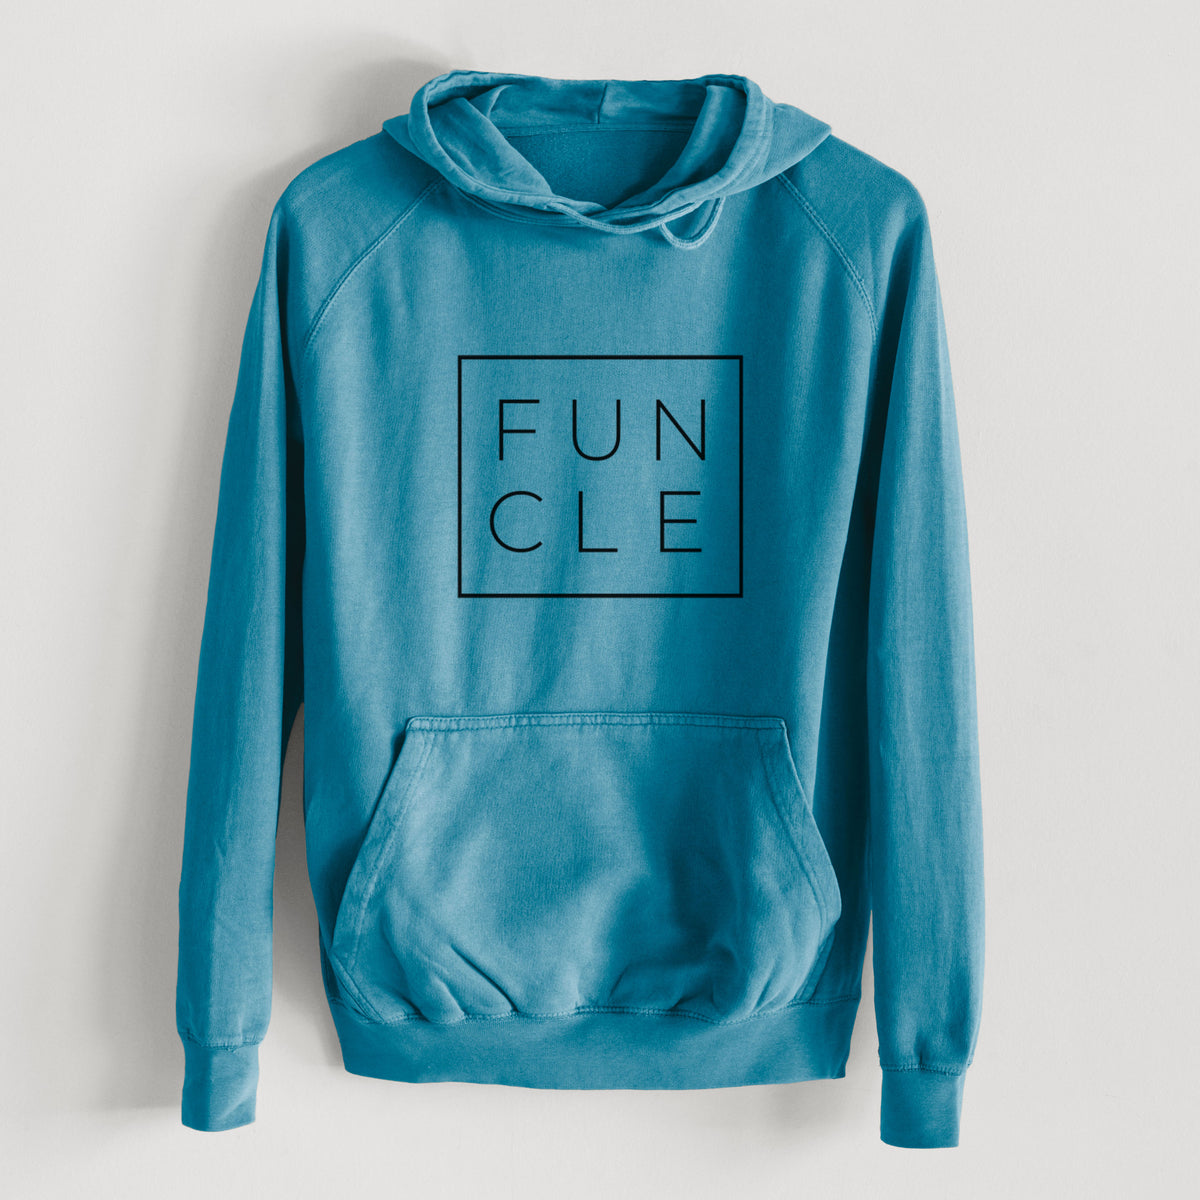 Funcle Boxed  - Mid-Weight Unisex Vintage 100% Cotton Hoodie